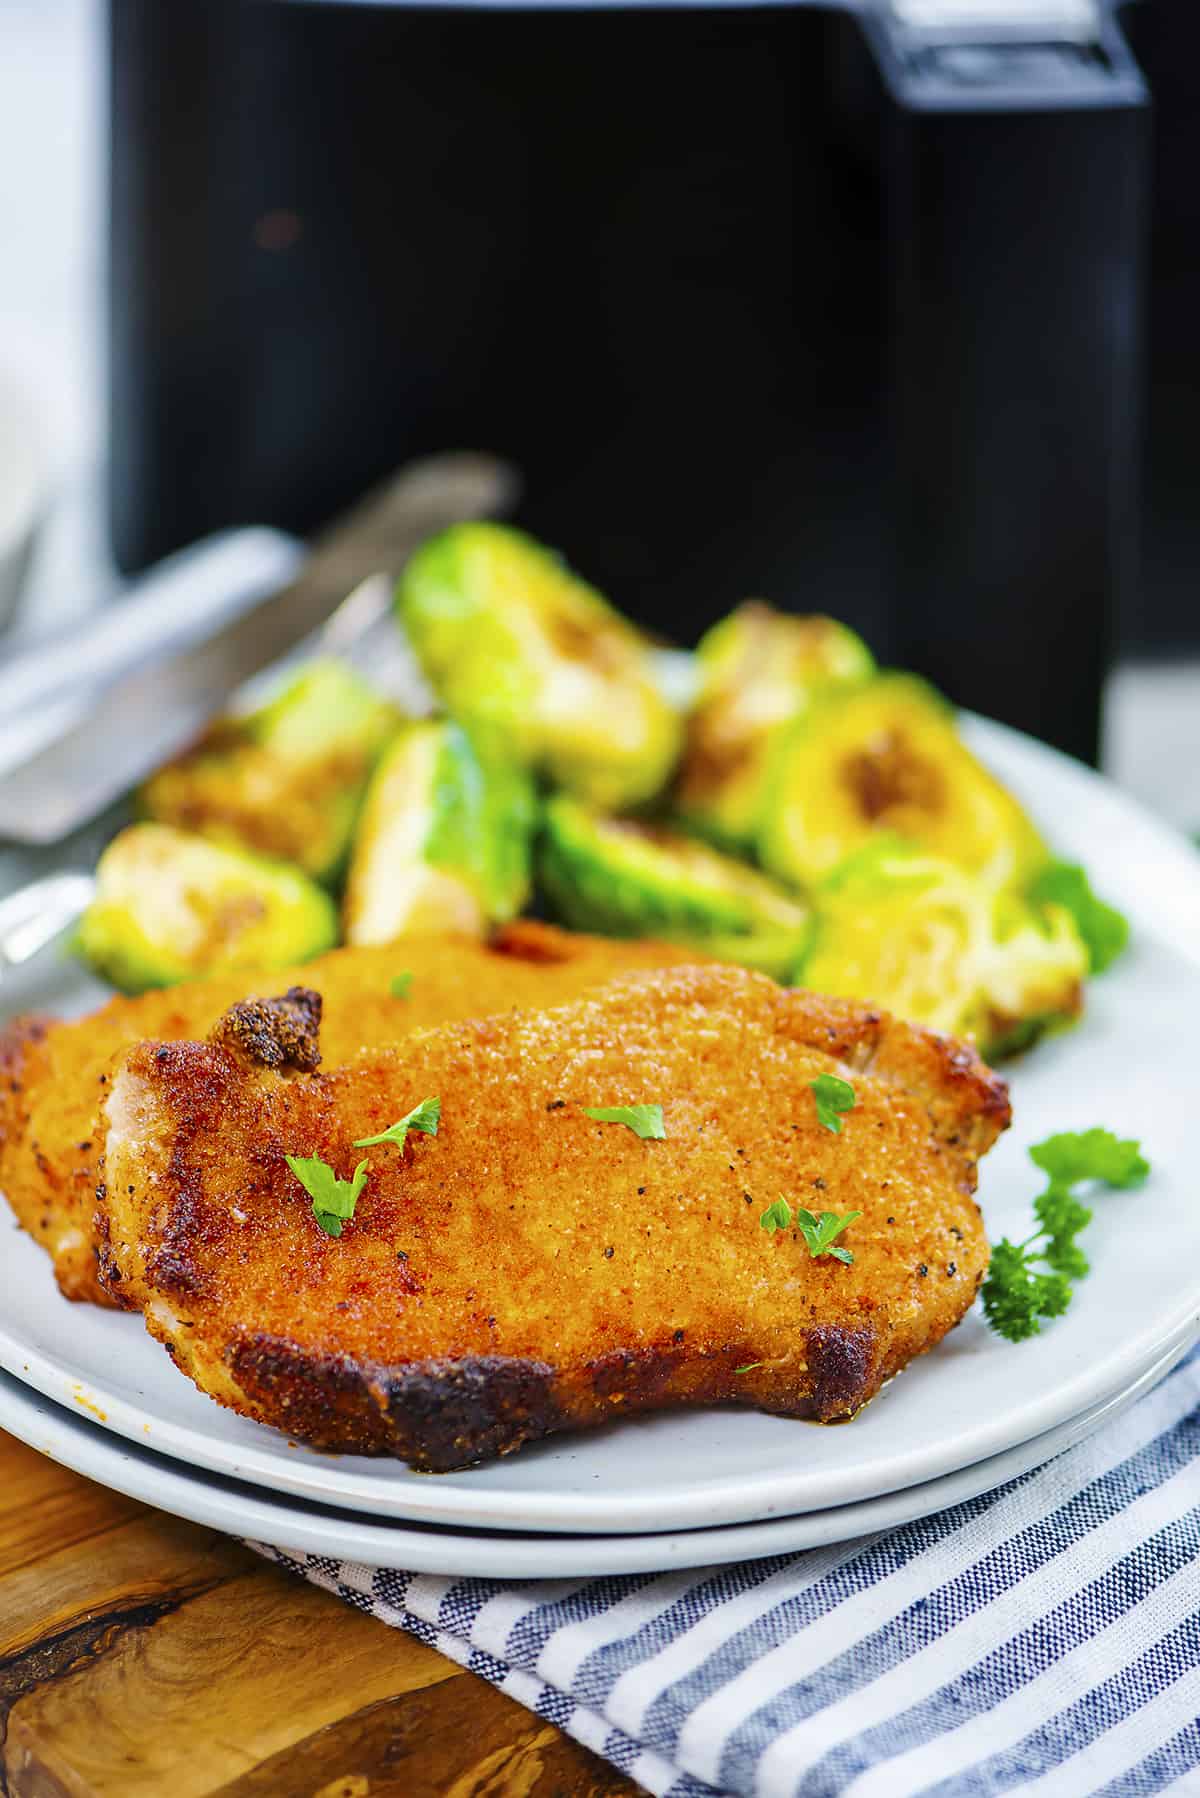 Pork chops on plate with Brussels sprouts.